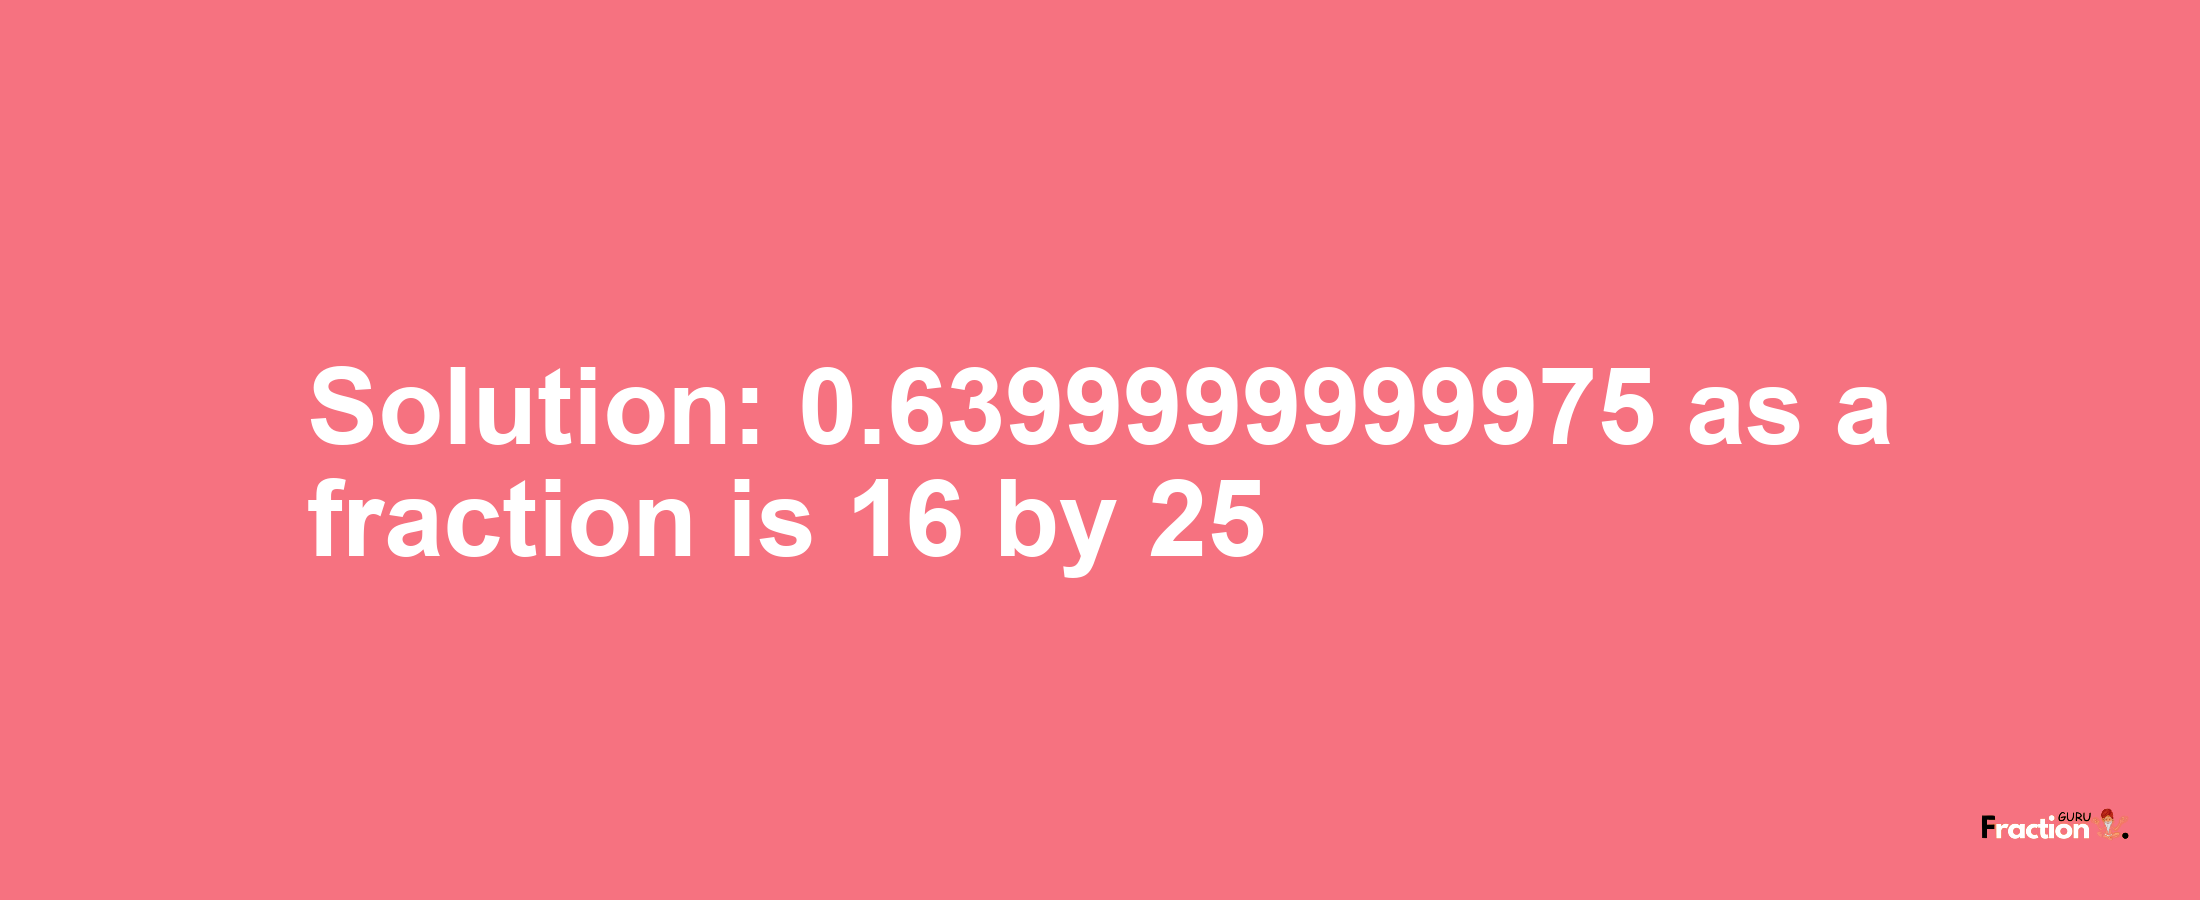 Solution:0.6399999999975 as a fraction is 16/25